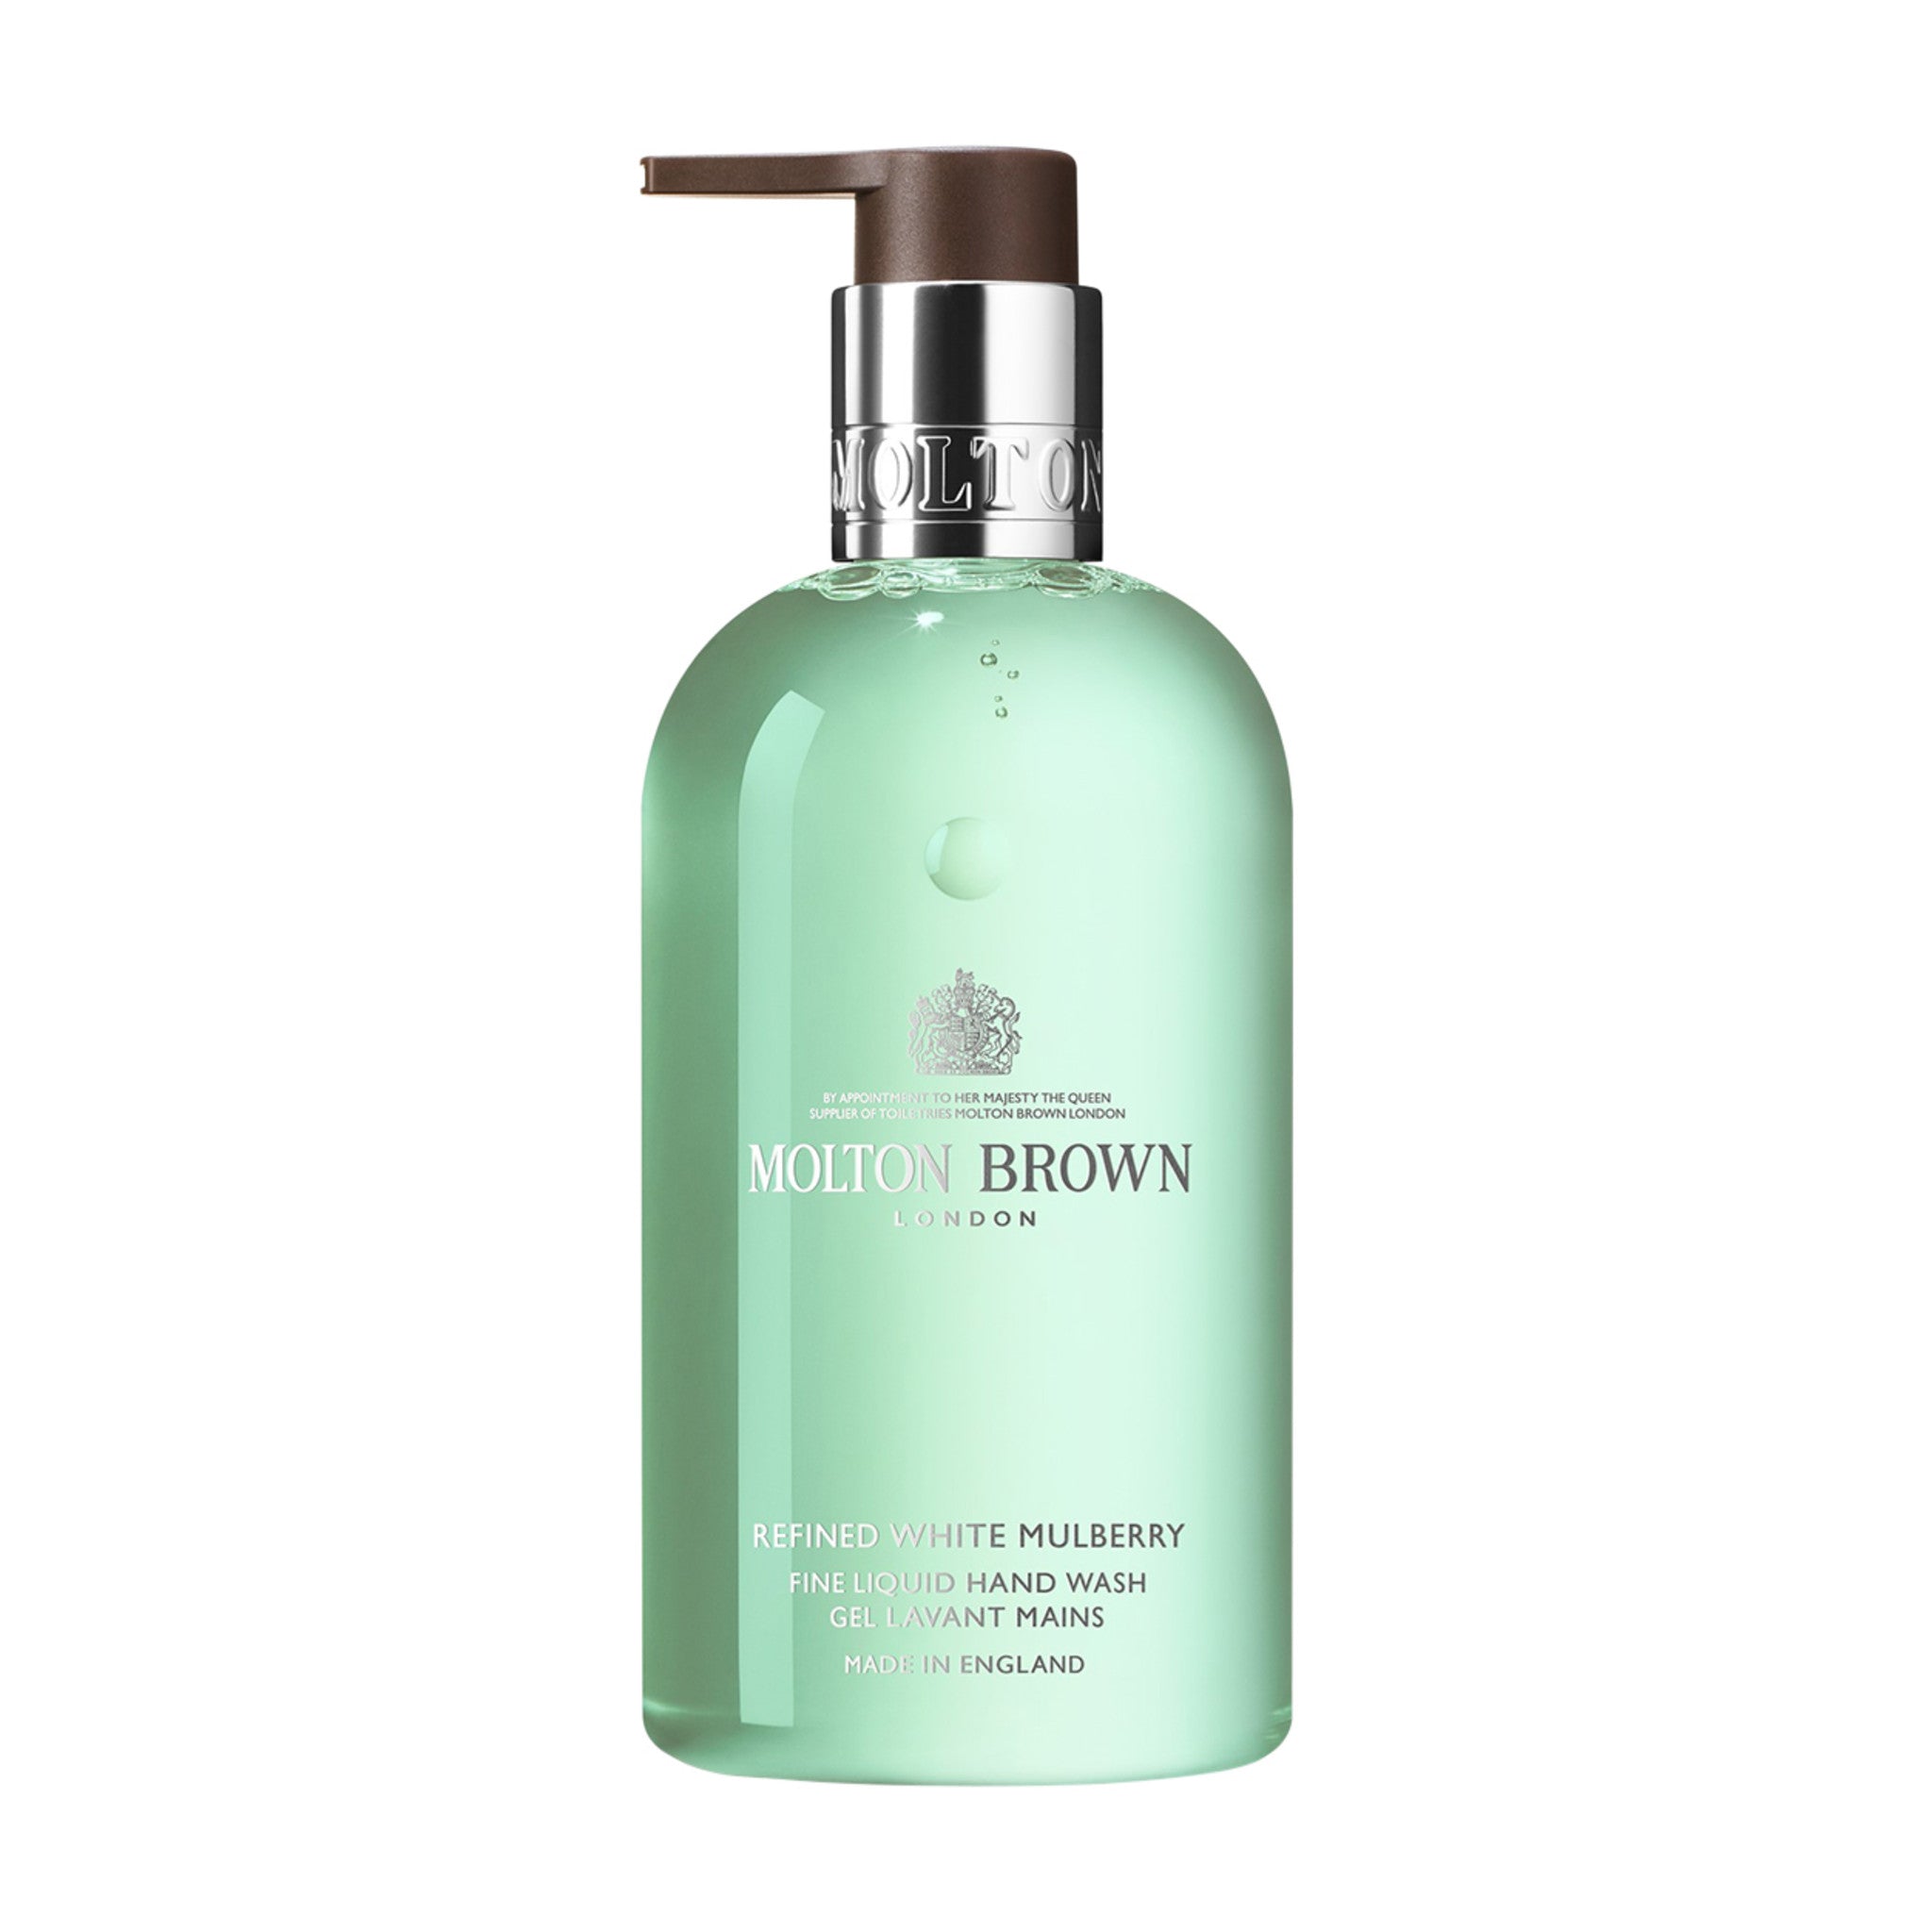 Molton Brown Refined White Mulberry Hand Wash main image.